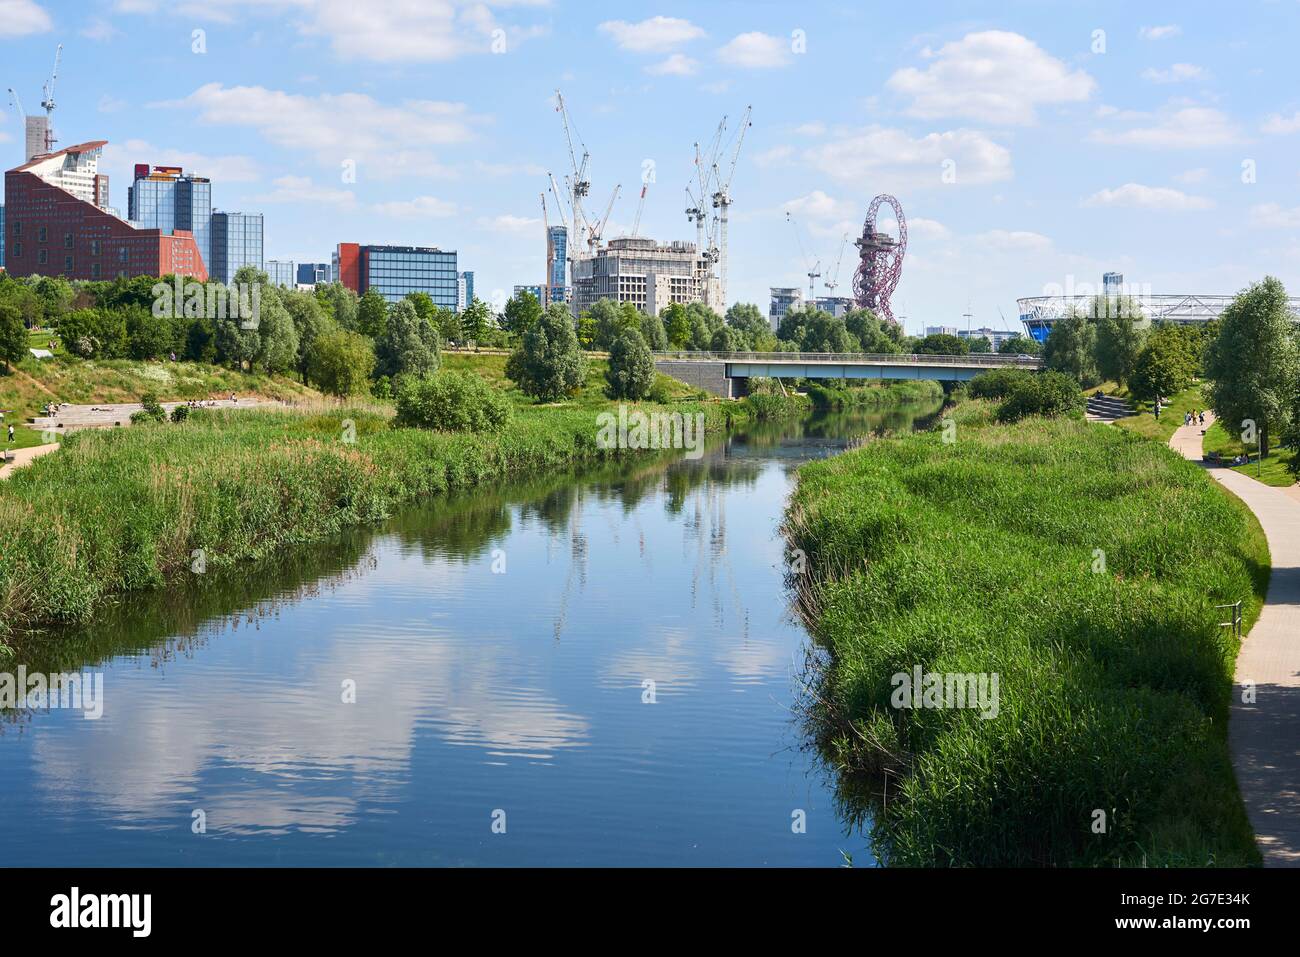 The River Lea at Queen Elizabeth Olympic Park, Stratford, East London UK, in summertime Stock Photo